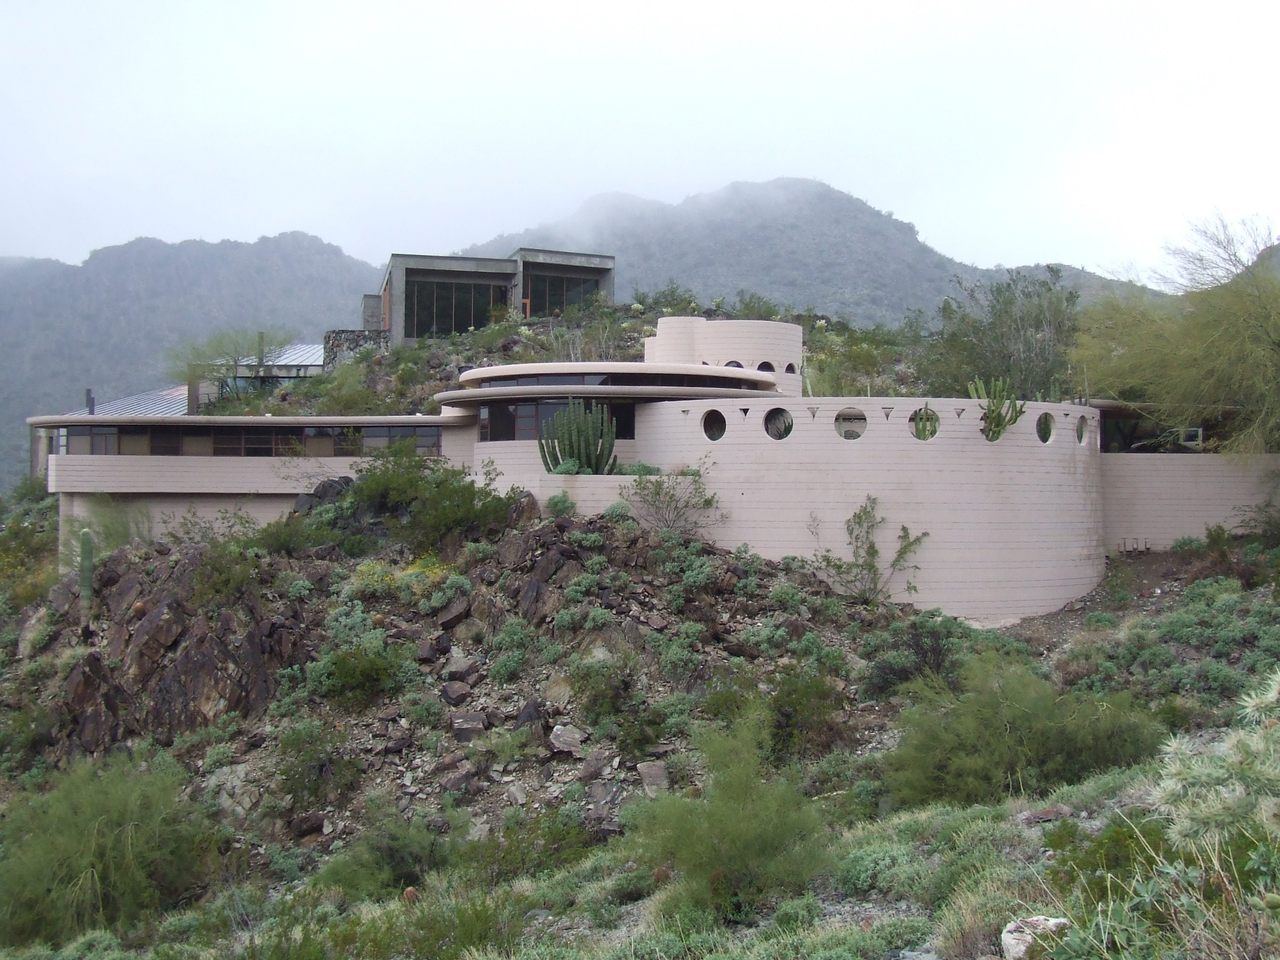 The Lykes House, nestled in the mountains of Phoenix, Arizona.